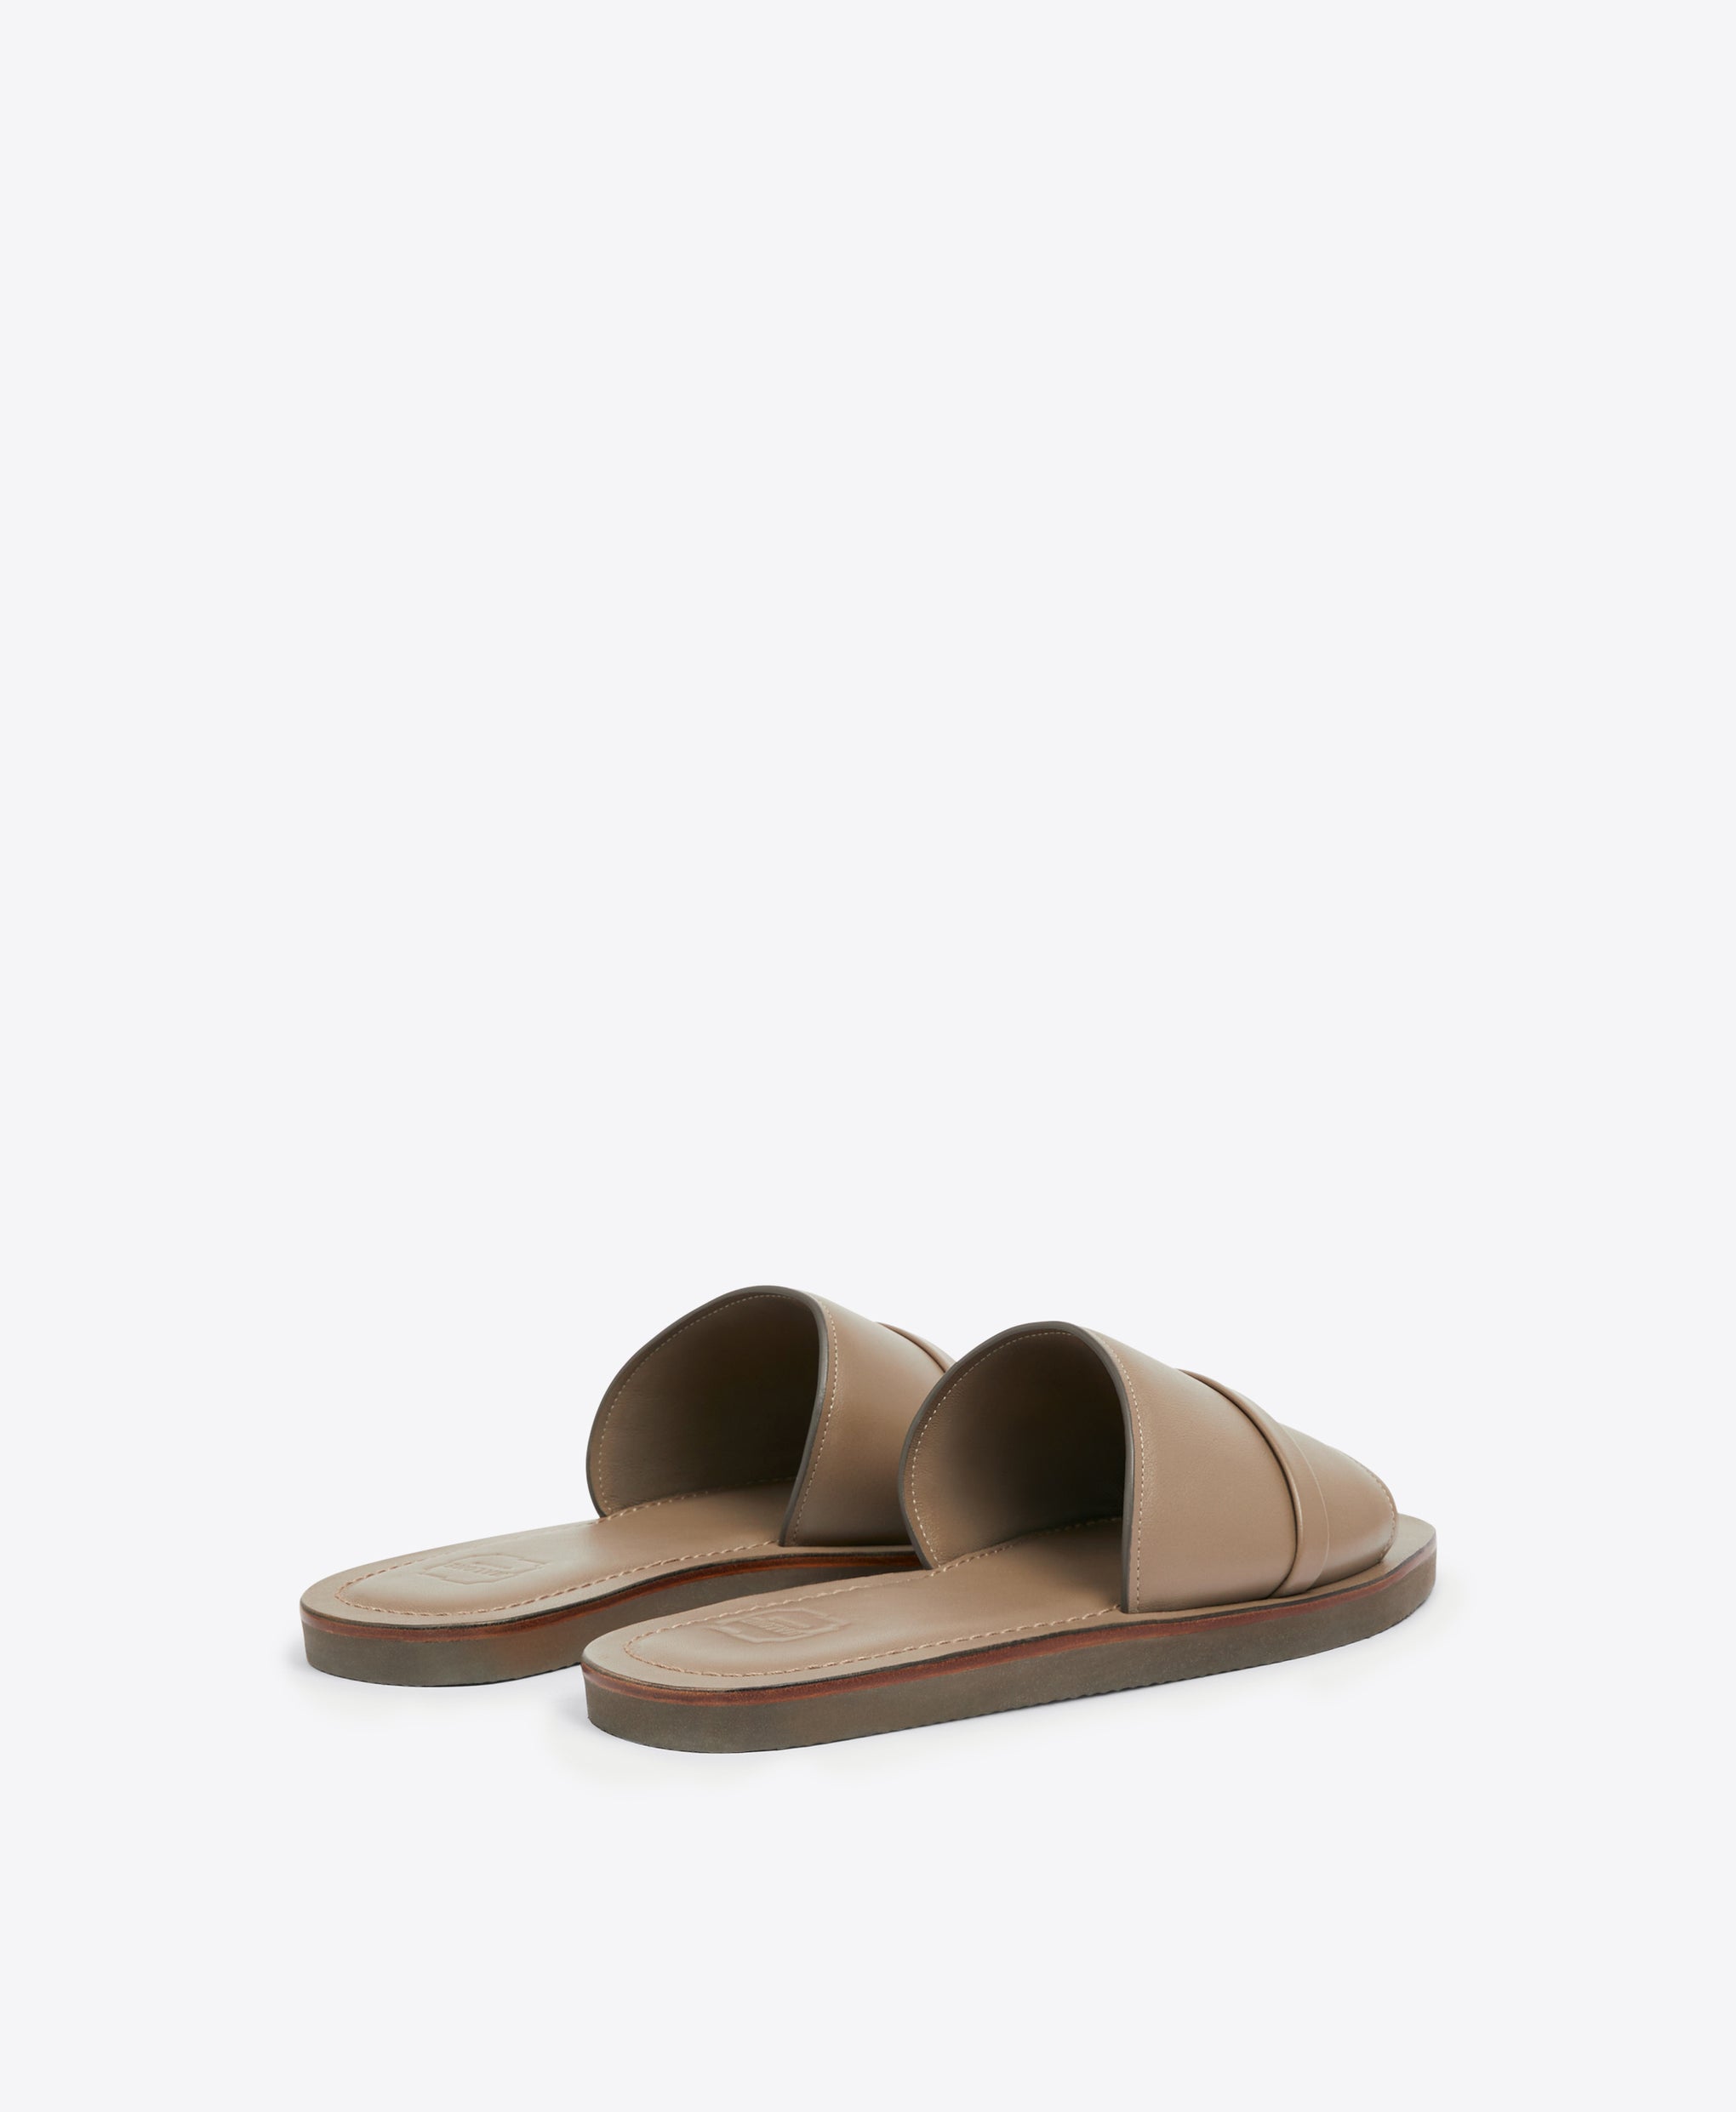 Men's Taupe Leather Slides  Malone Souliers